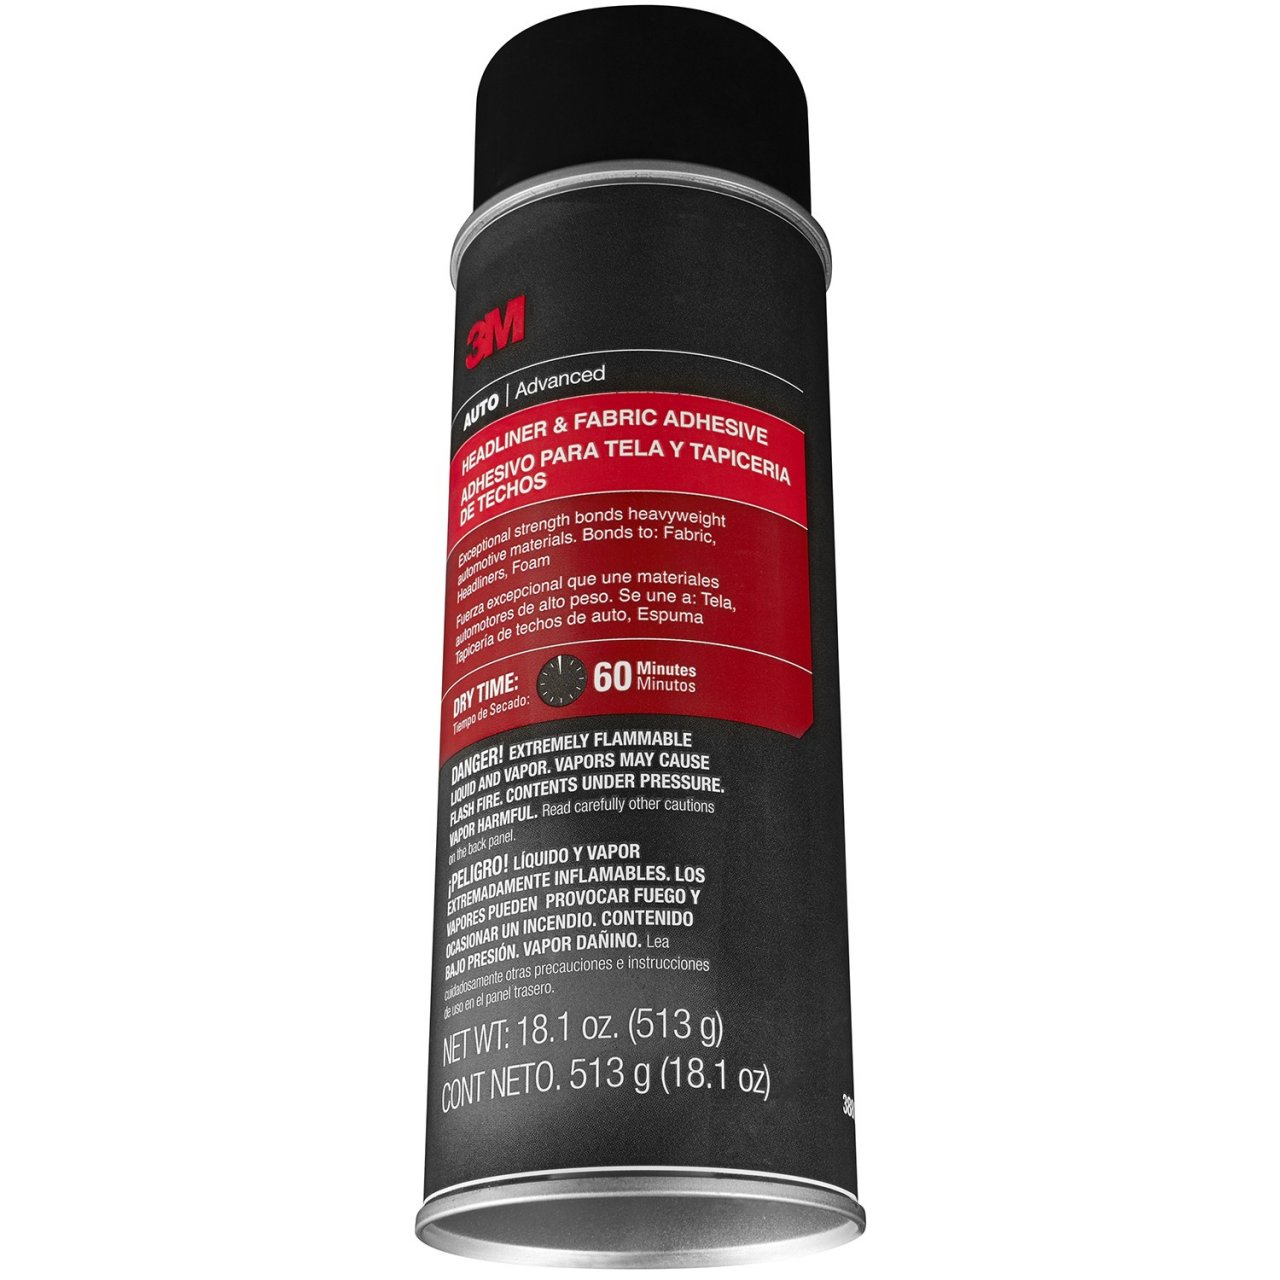 Do not use 3M Super 77 for headliner adhesive